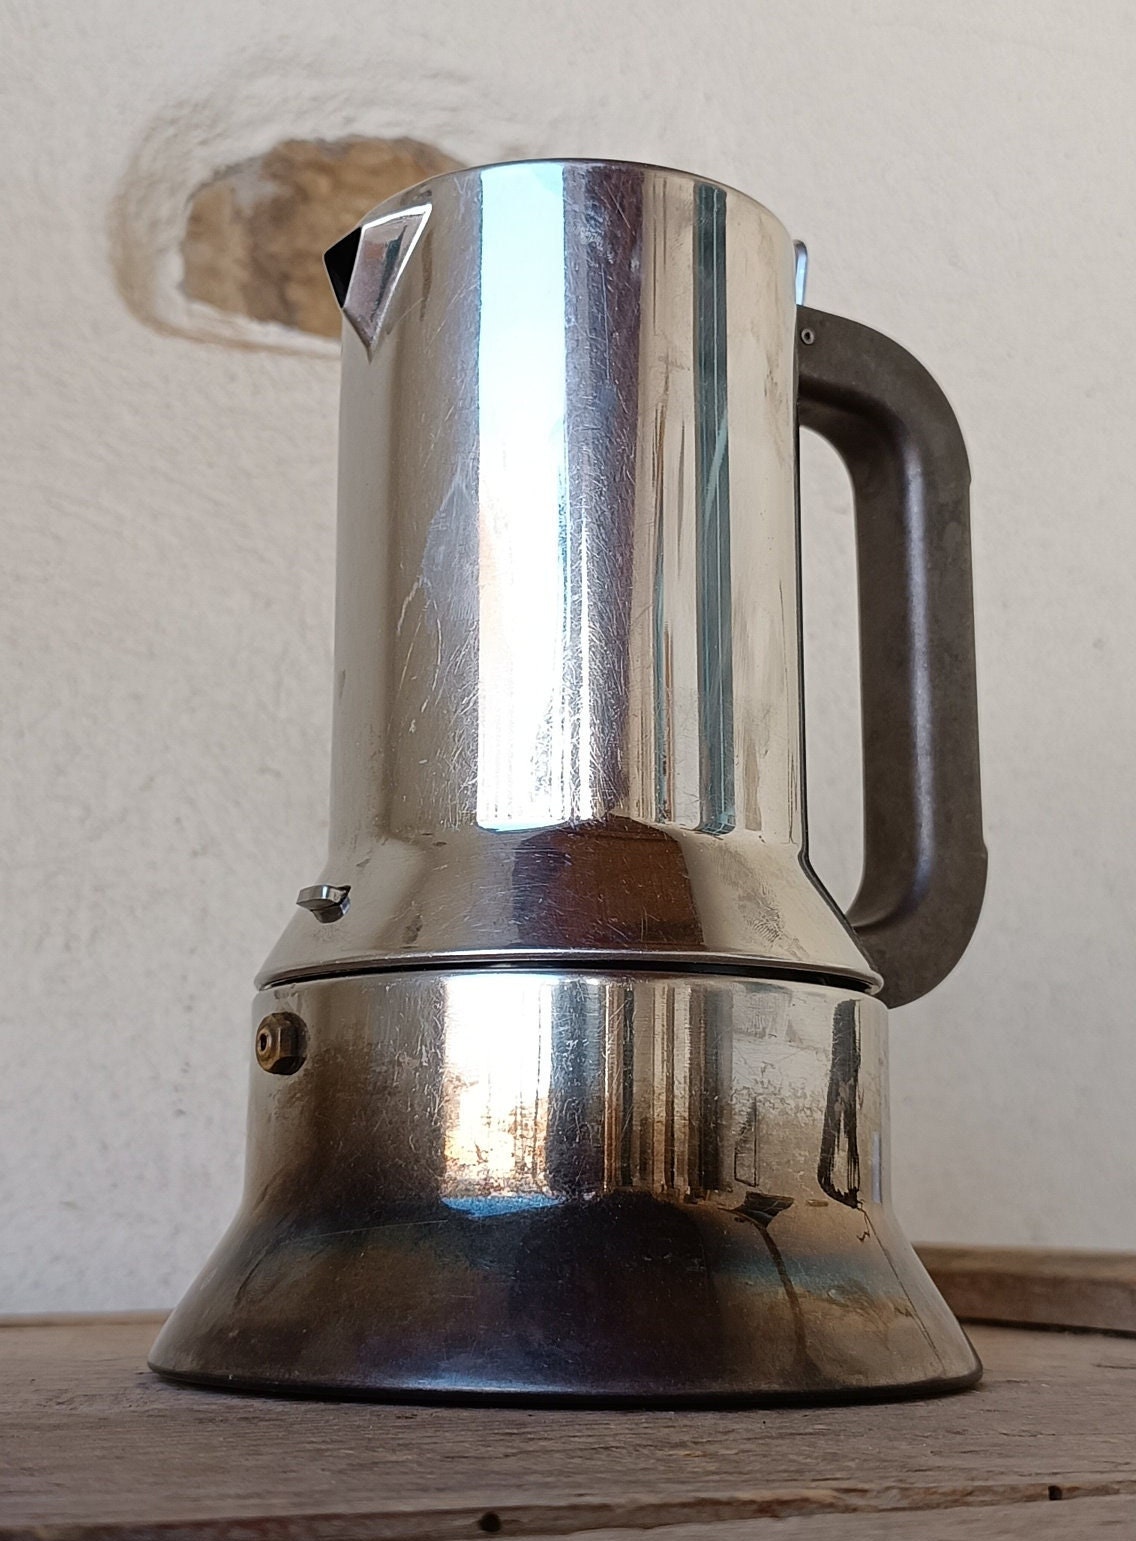 Large Alessi 9090/M Espresso Coffee Maker, 10 Cups, Design Richard Sapper,  Made in Italy, Moka Pot, Collectible 